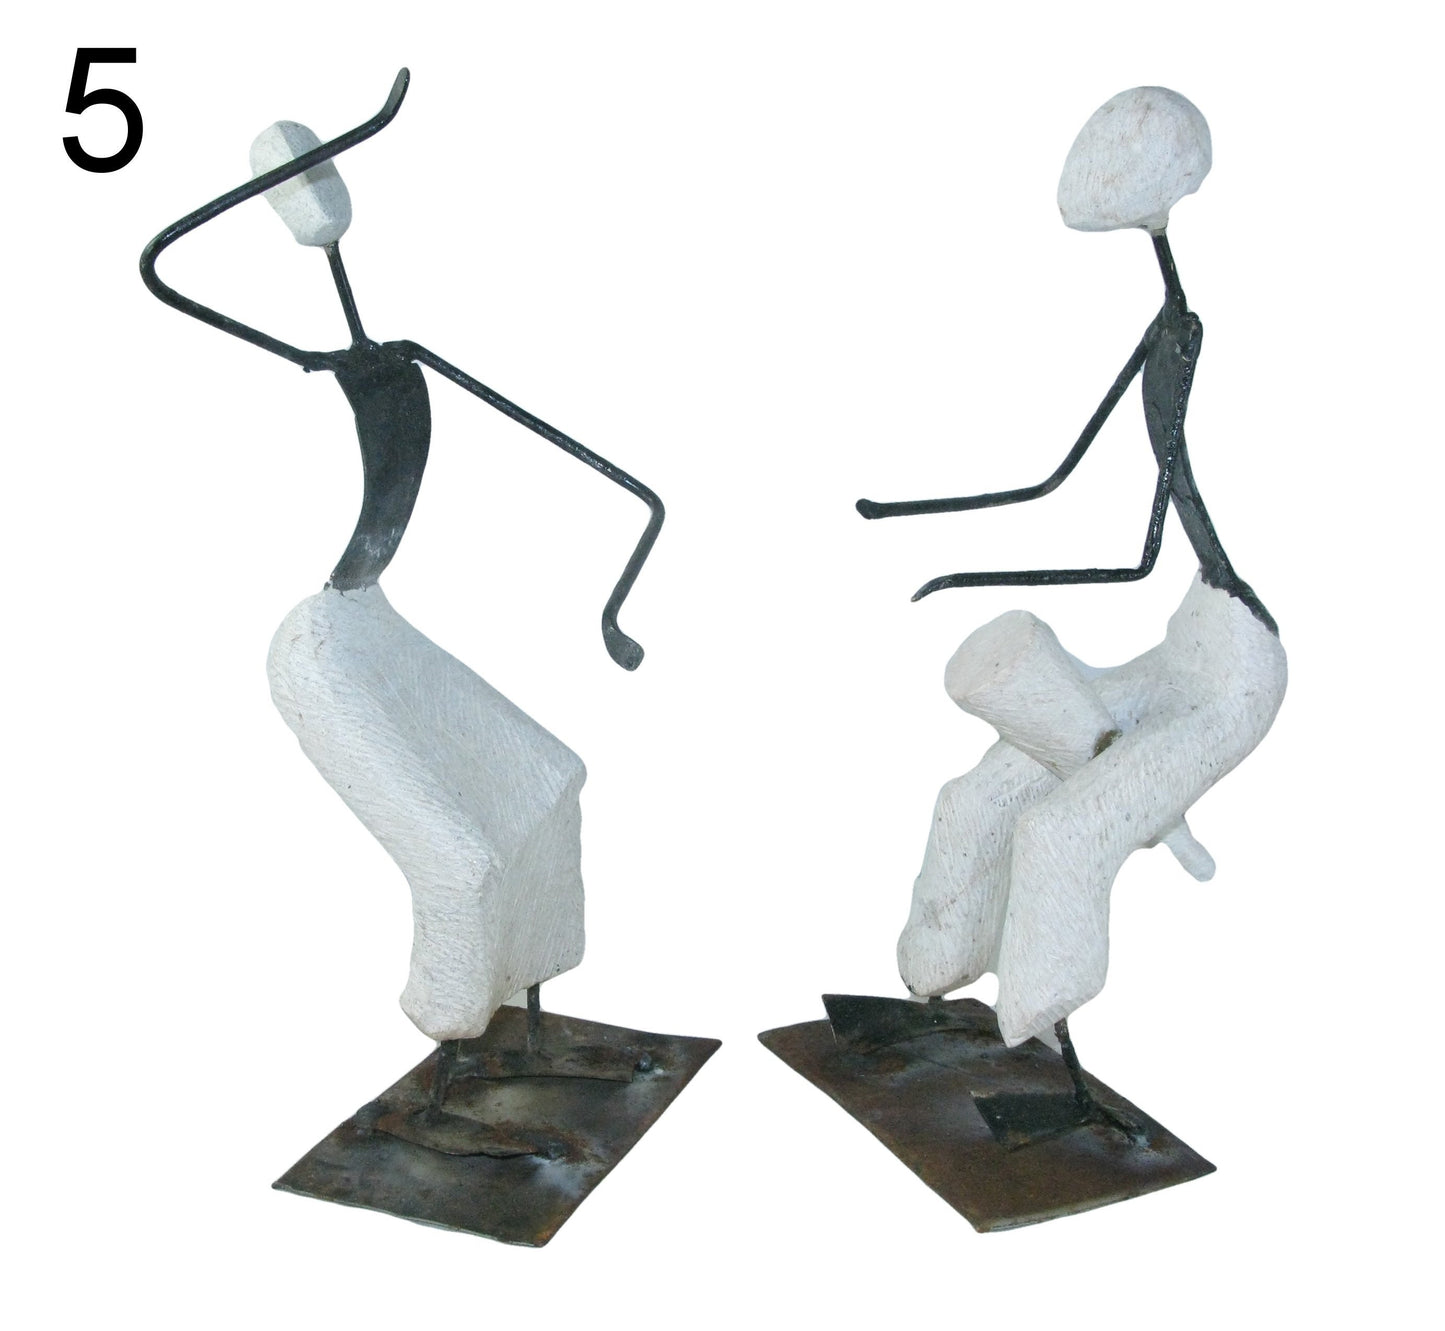 African Dancers Stone & Metal Sculptures from Zimbabwe 24m Tall Pair with Storycard Choose Your Unique Pair